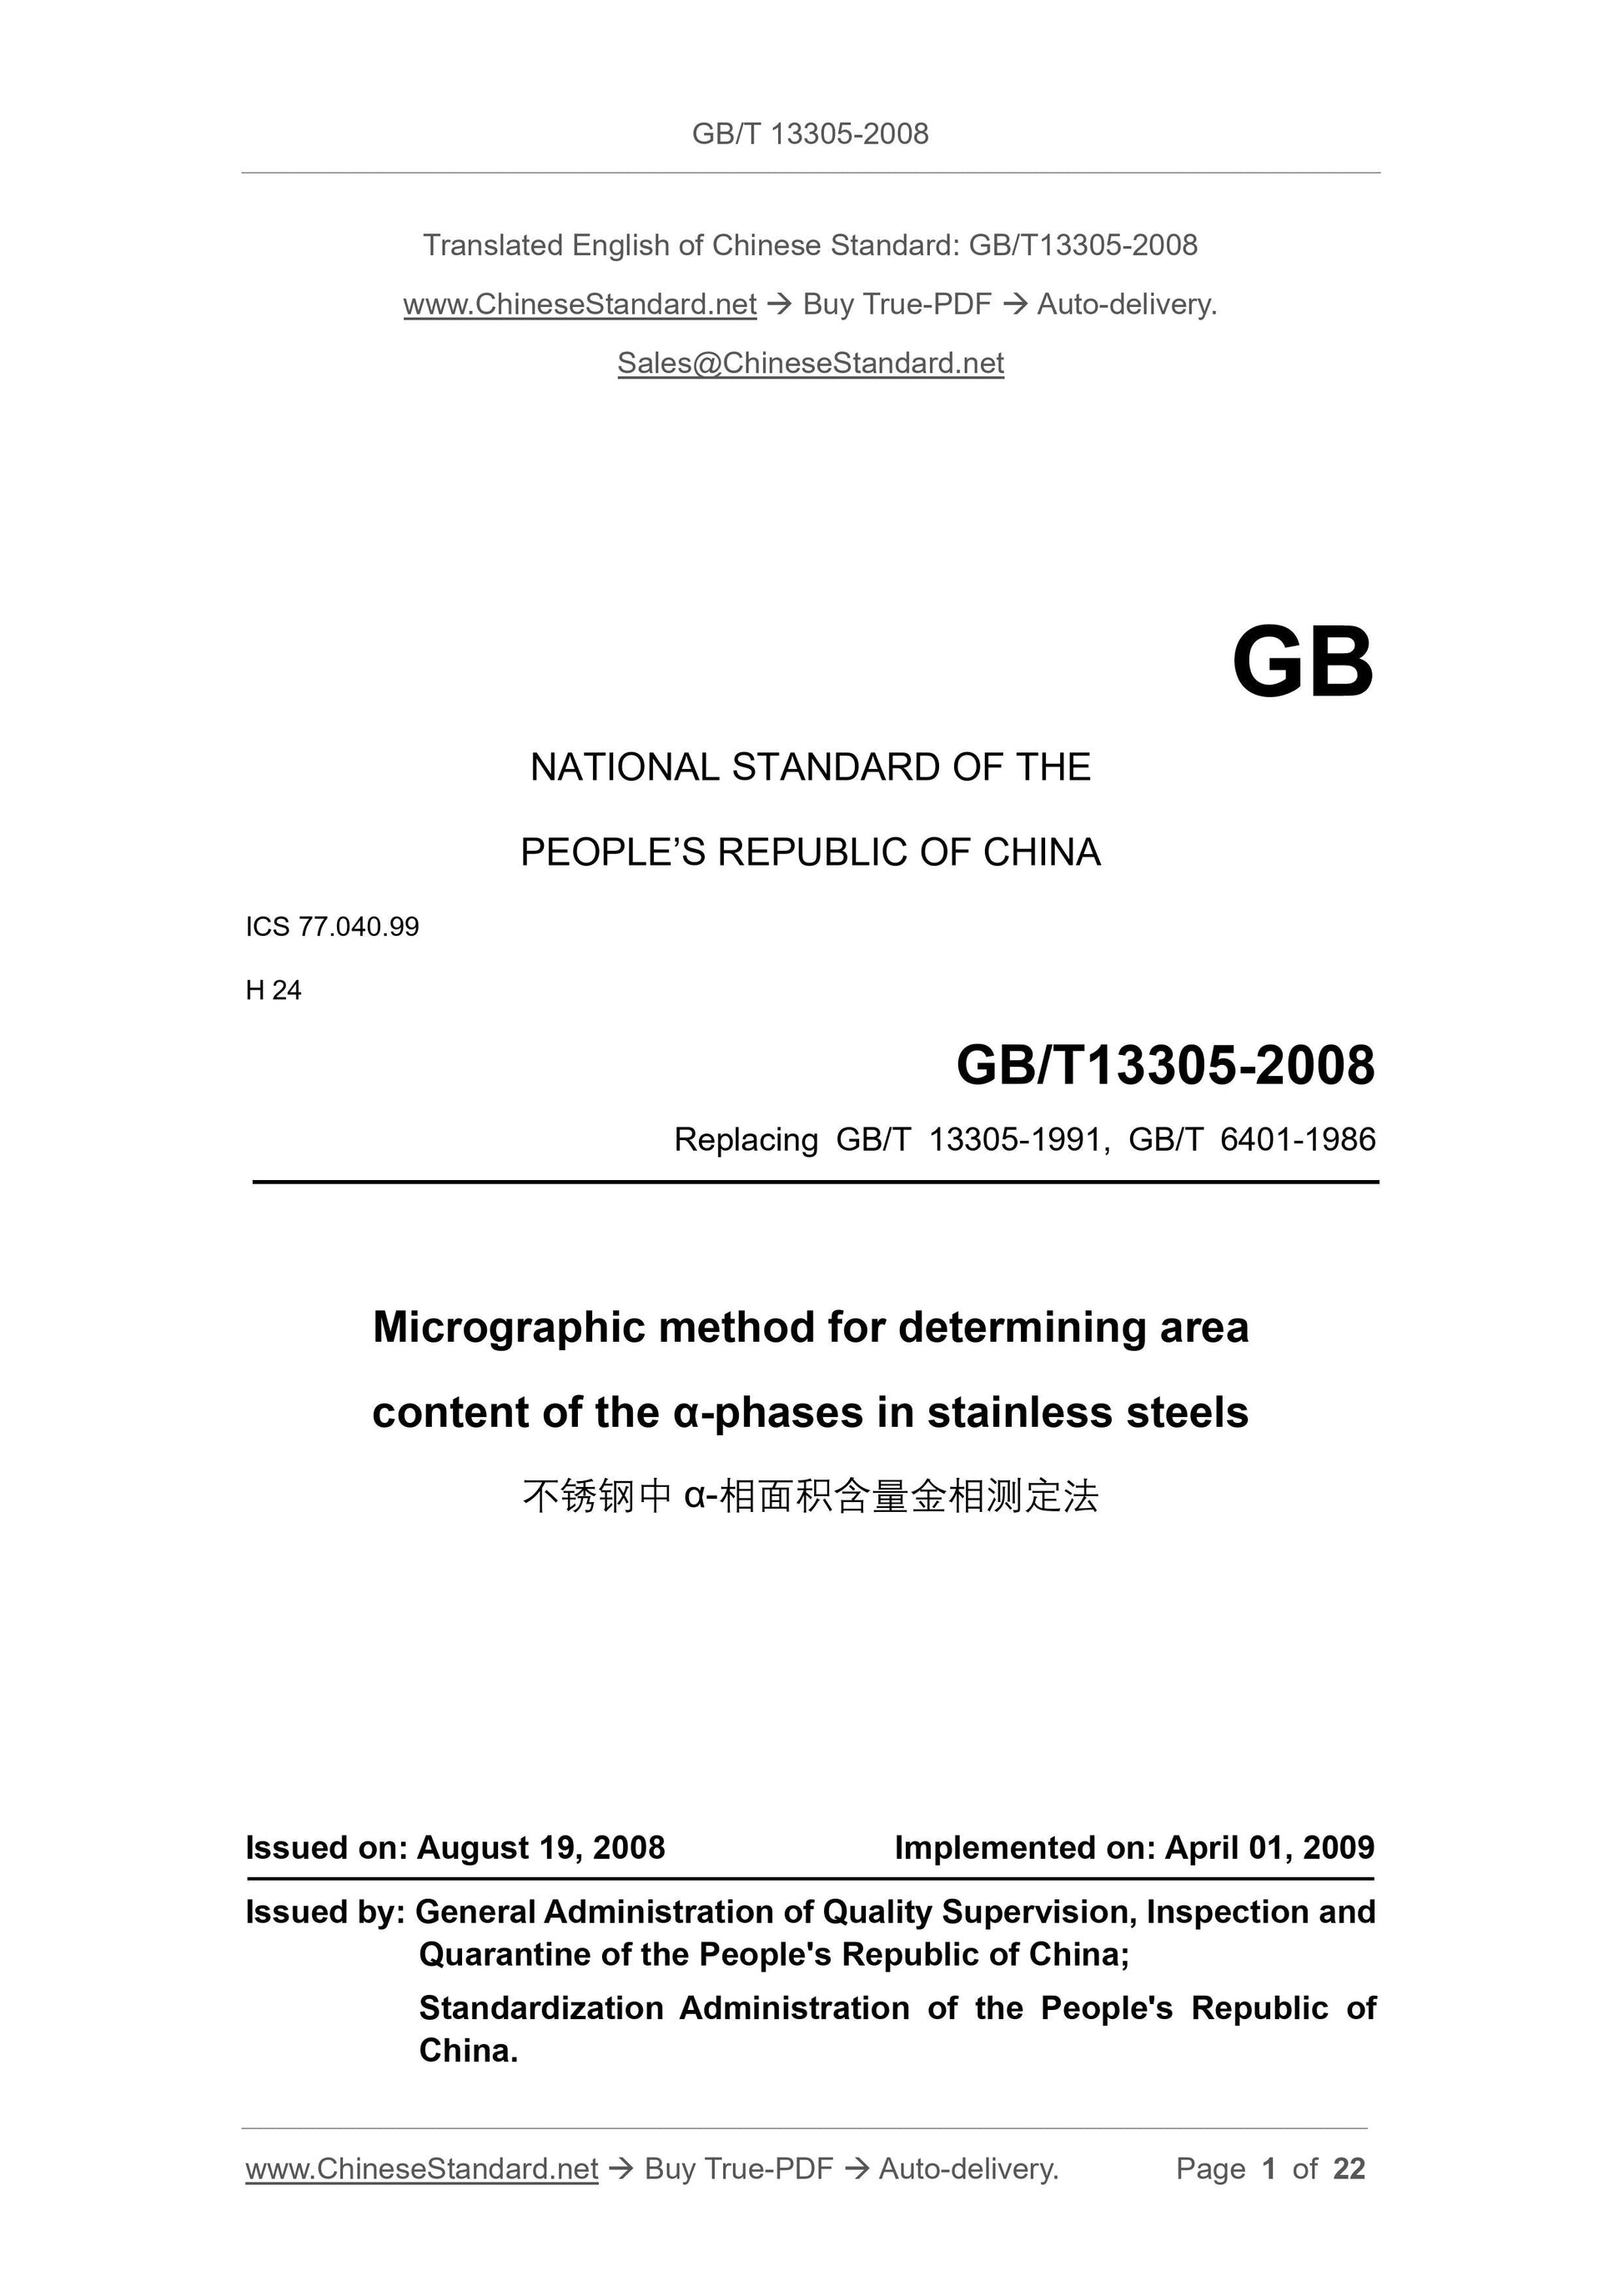 GB/T 13305-2008 Page 1